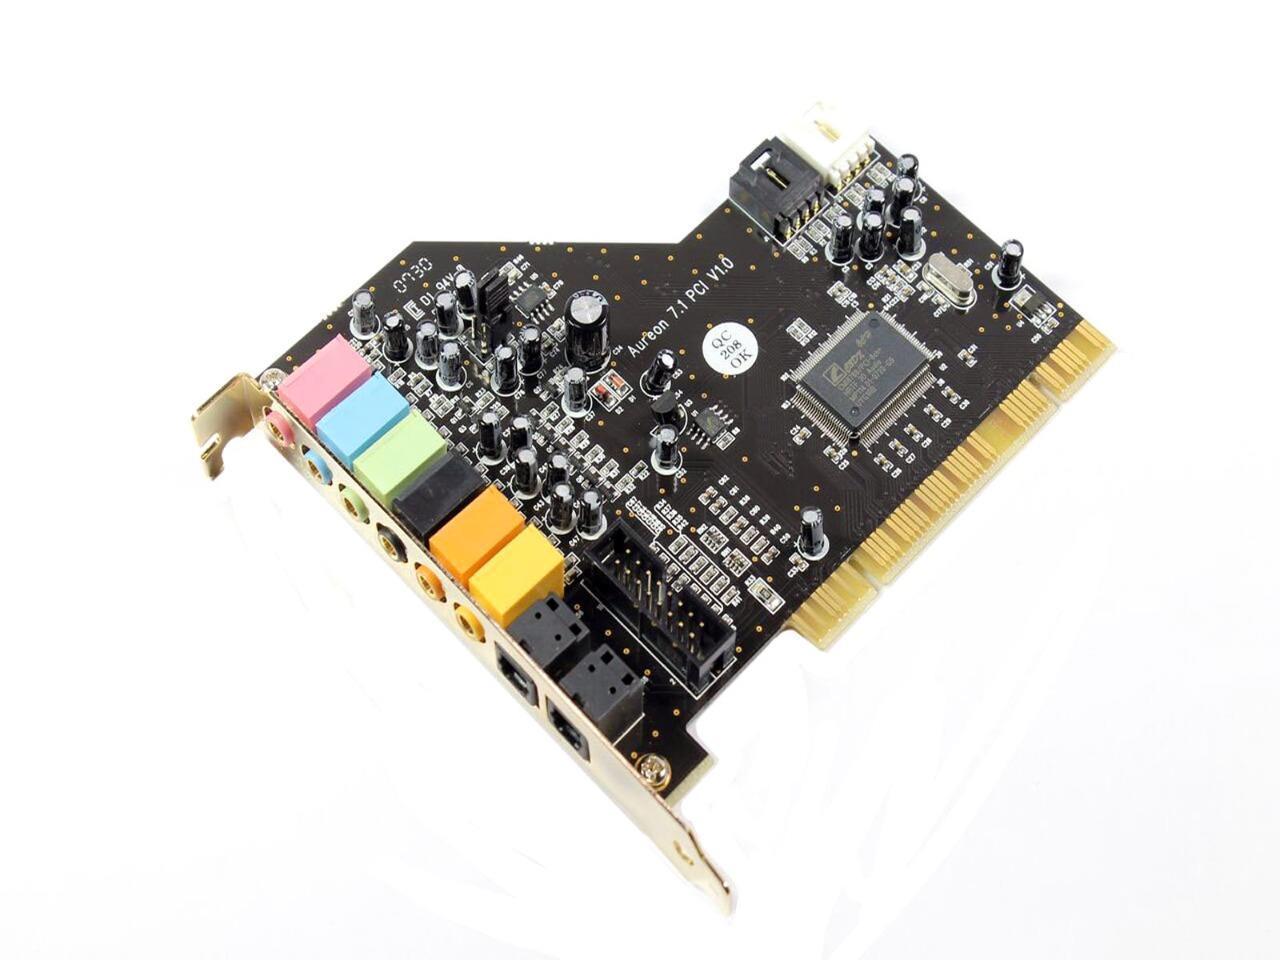 fg-ps4c-a1-01-st01 sound card motherboard requirements